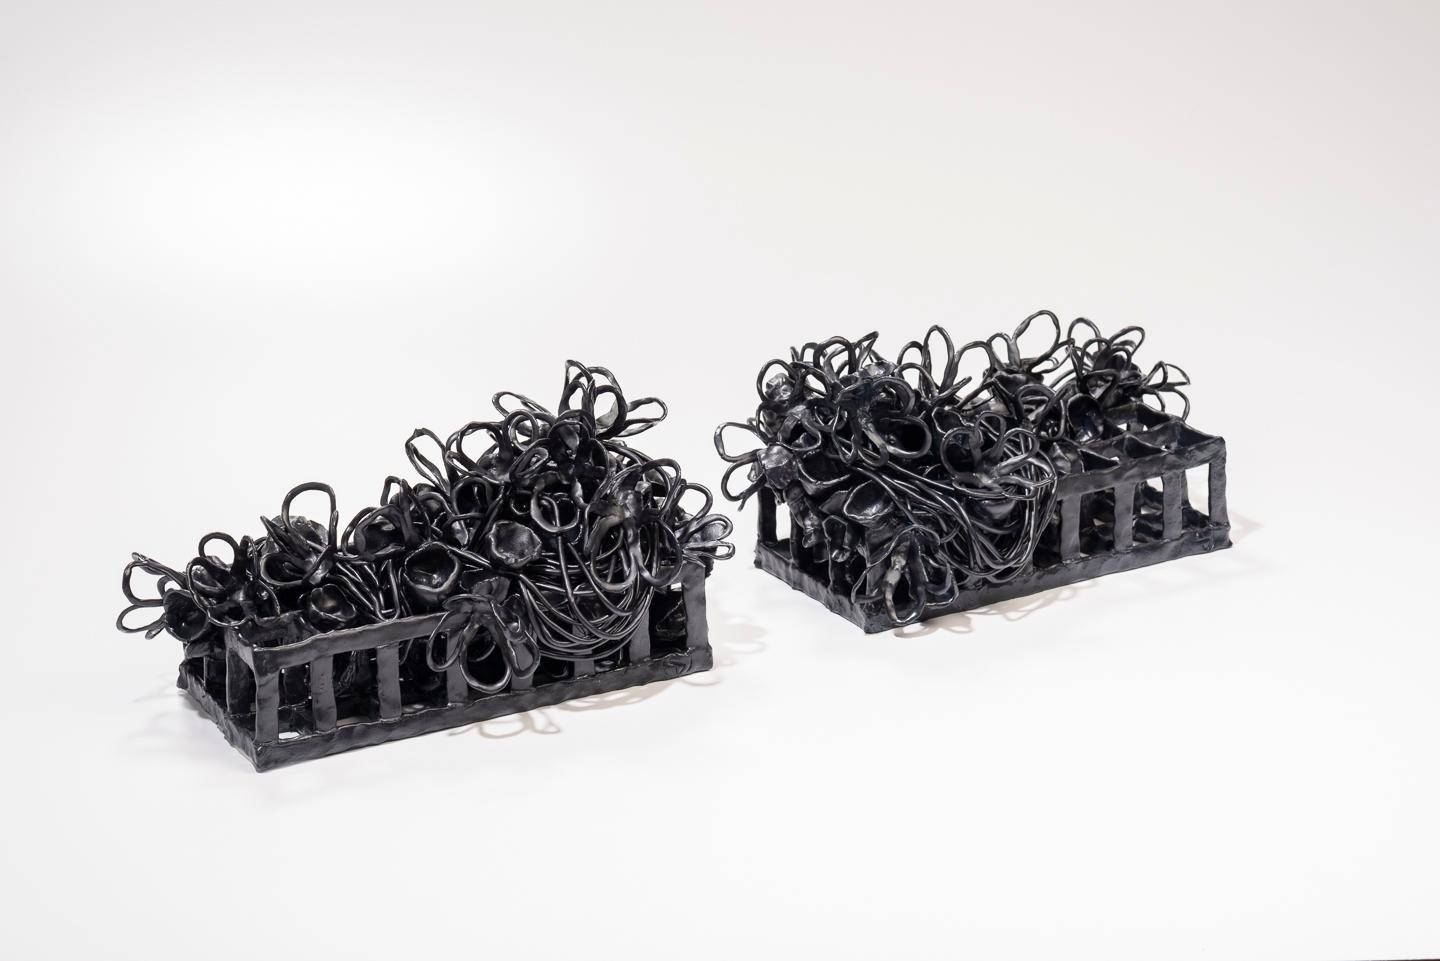 Organic Modern Joanna Poag Binding Time(Black Grid w/ Flowers and Pods) Ceramic Sculpture, 2019 For Sale